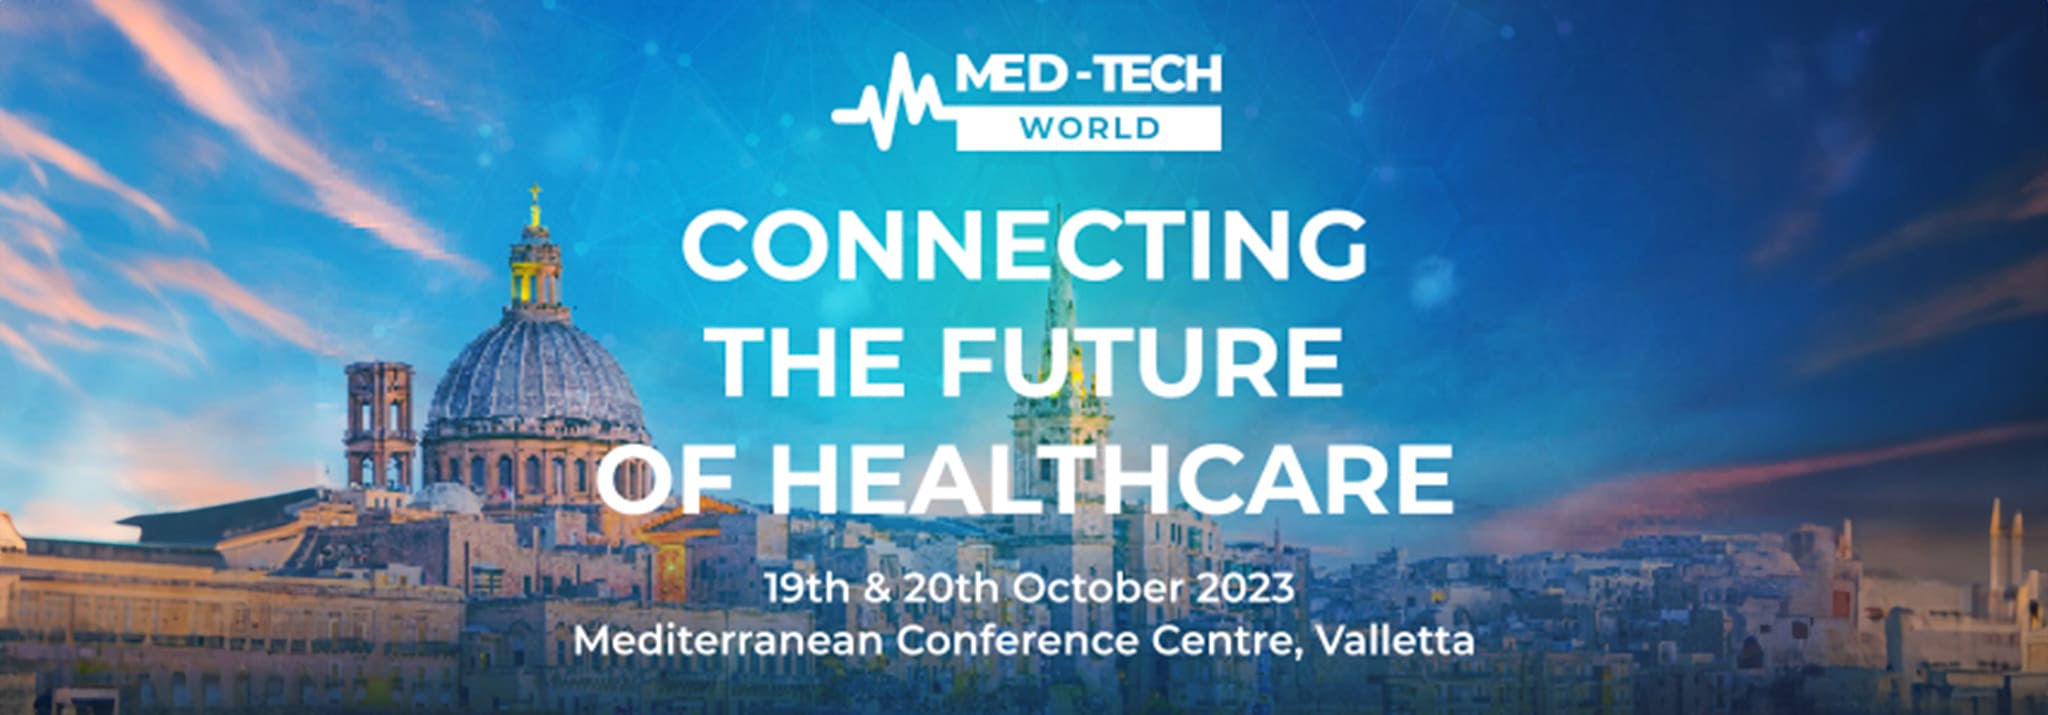 Med-Tech Malta: Connecting the future of healthcare